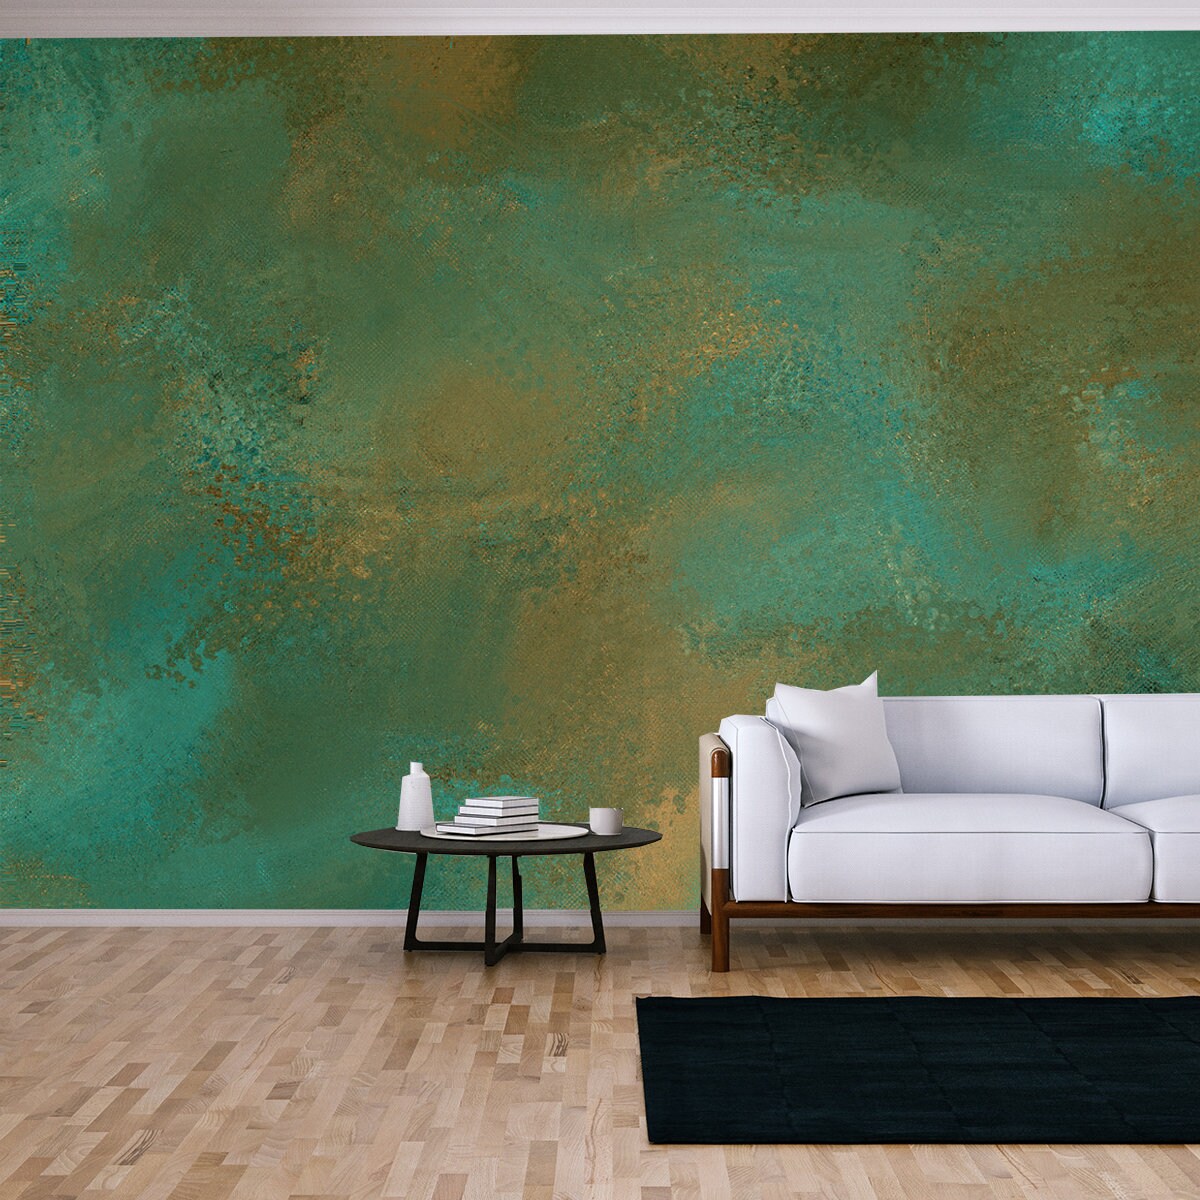 Emerald Green Metallic Rusty Texture Background. Aged Vintage Green Rust Stains Wallpaper Living Room Mural